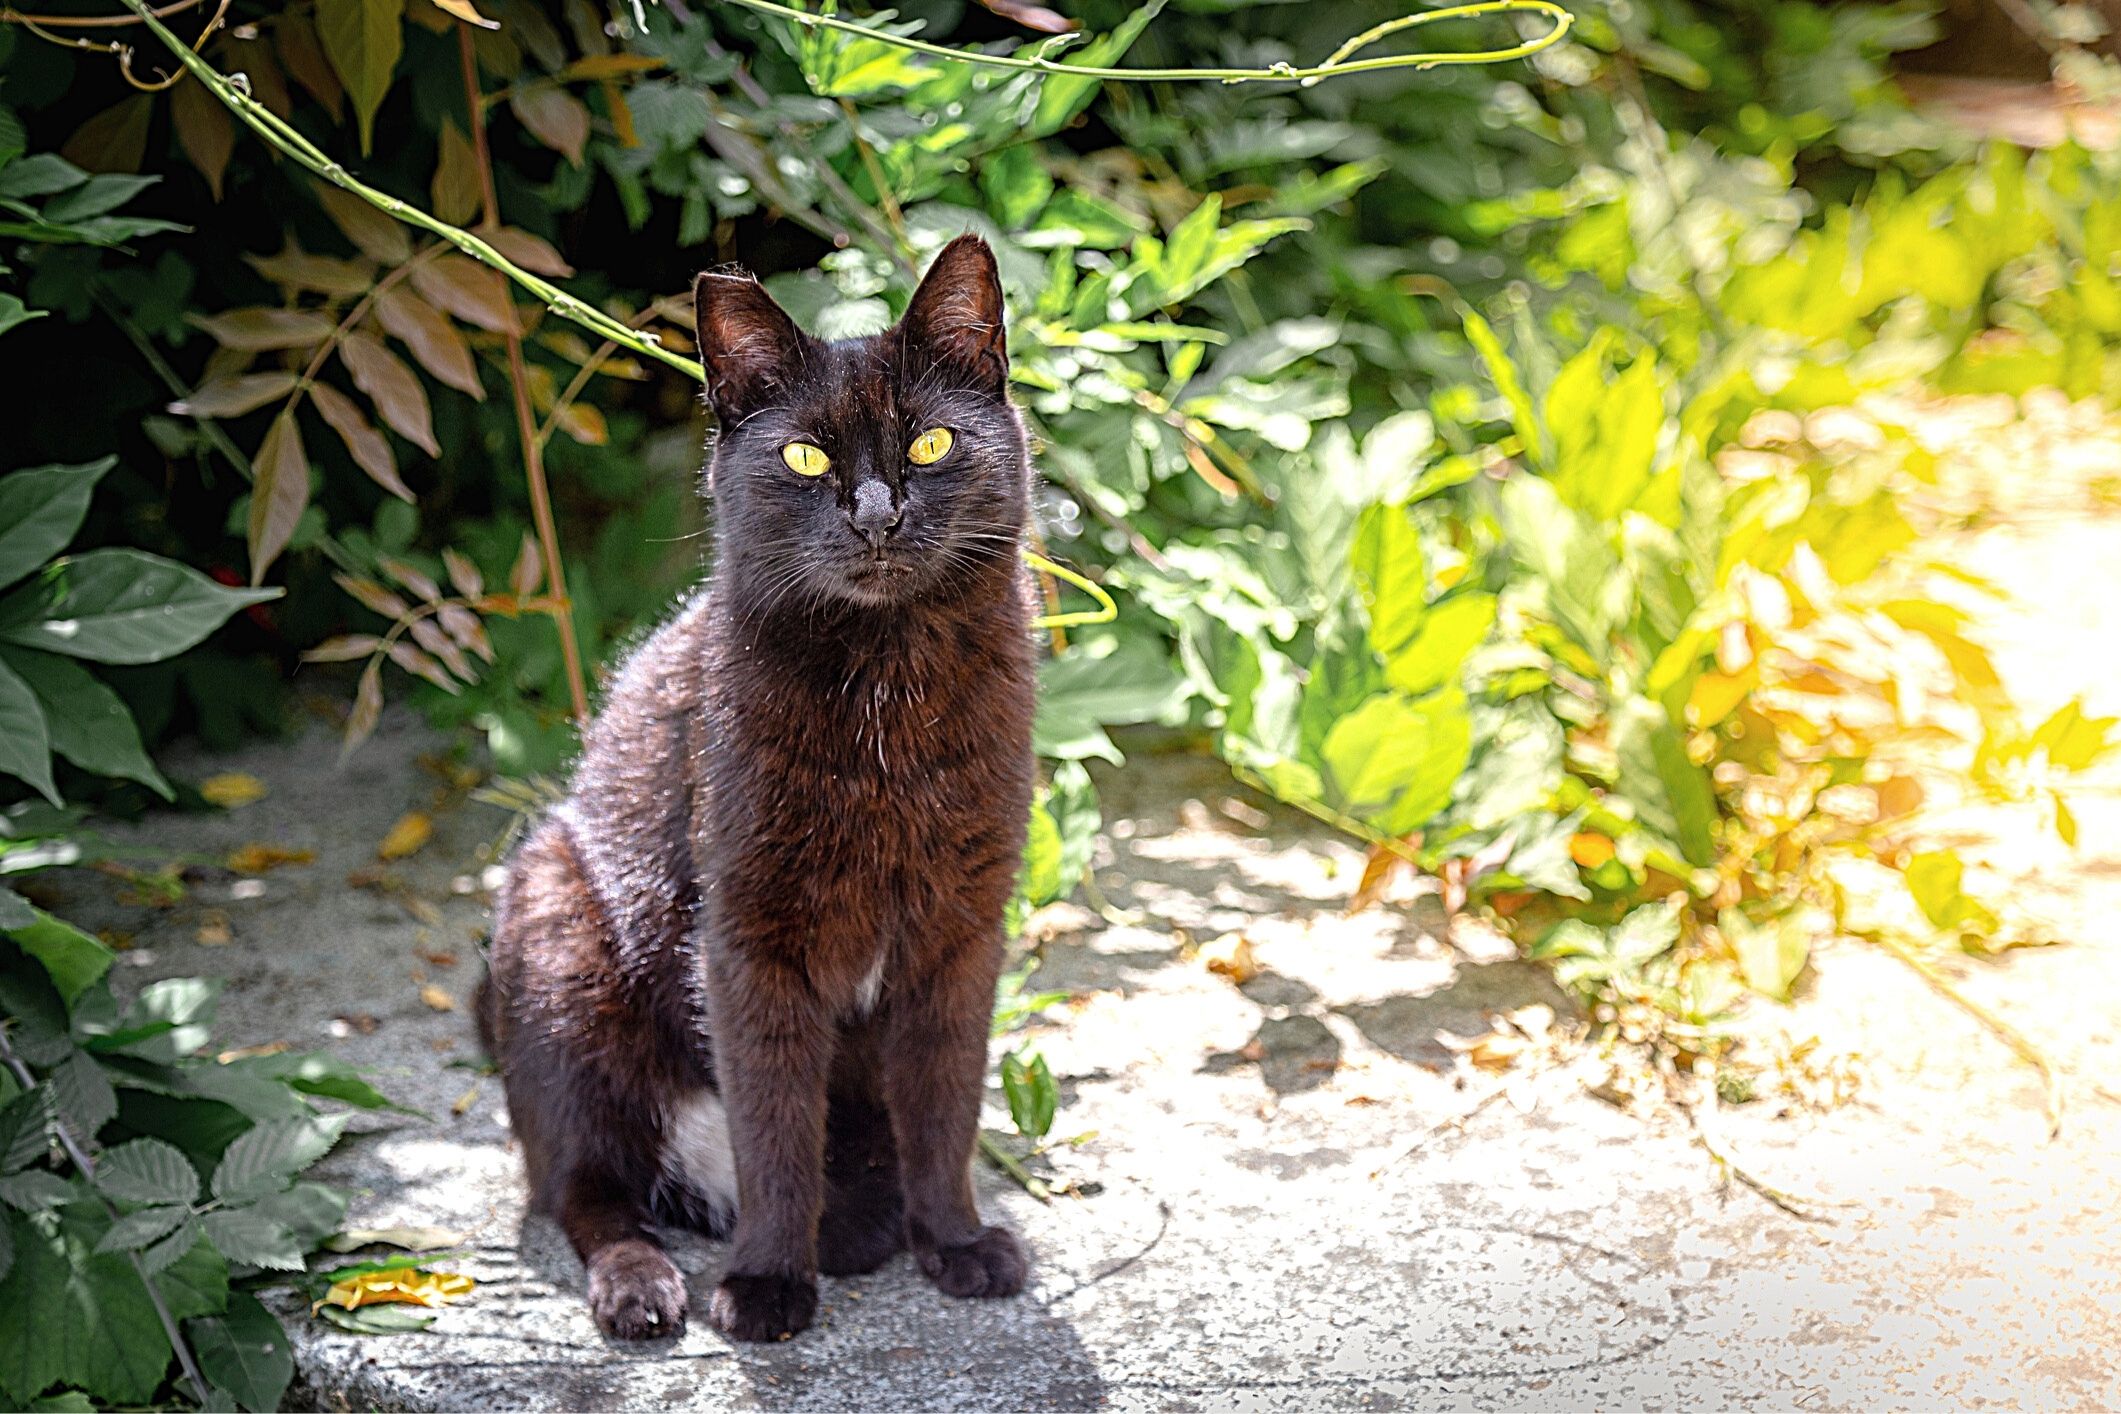 Elderly woman saved by pet cat that alerted neighbours after a dangerous fall